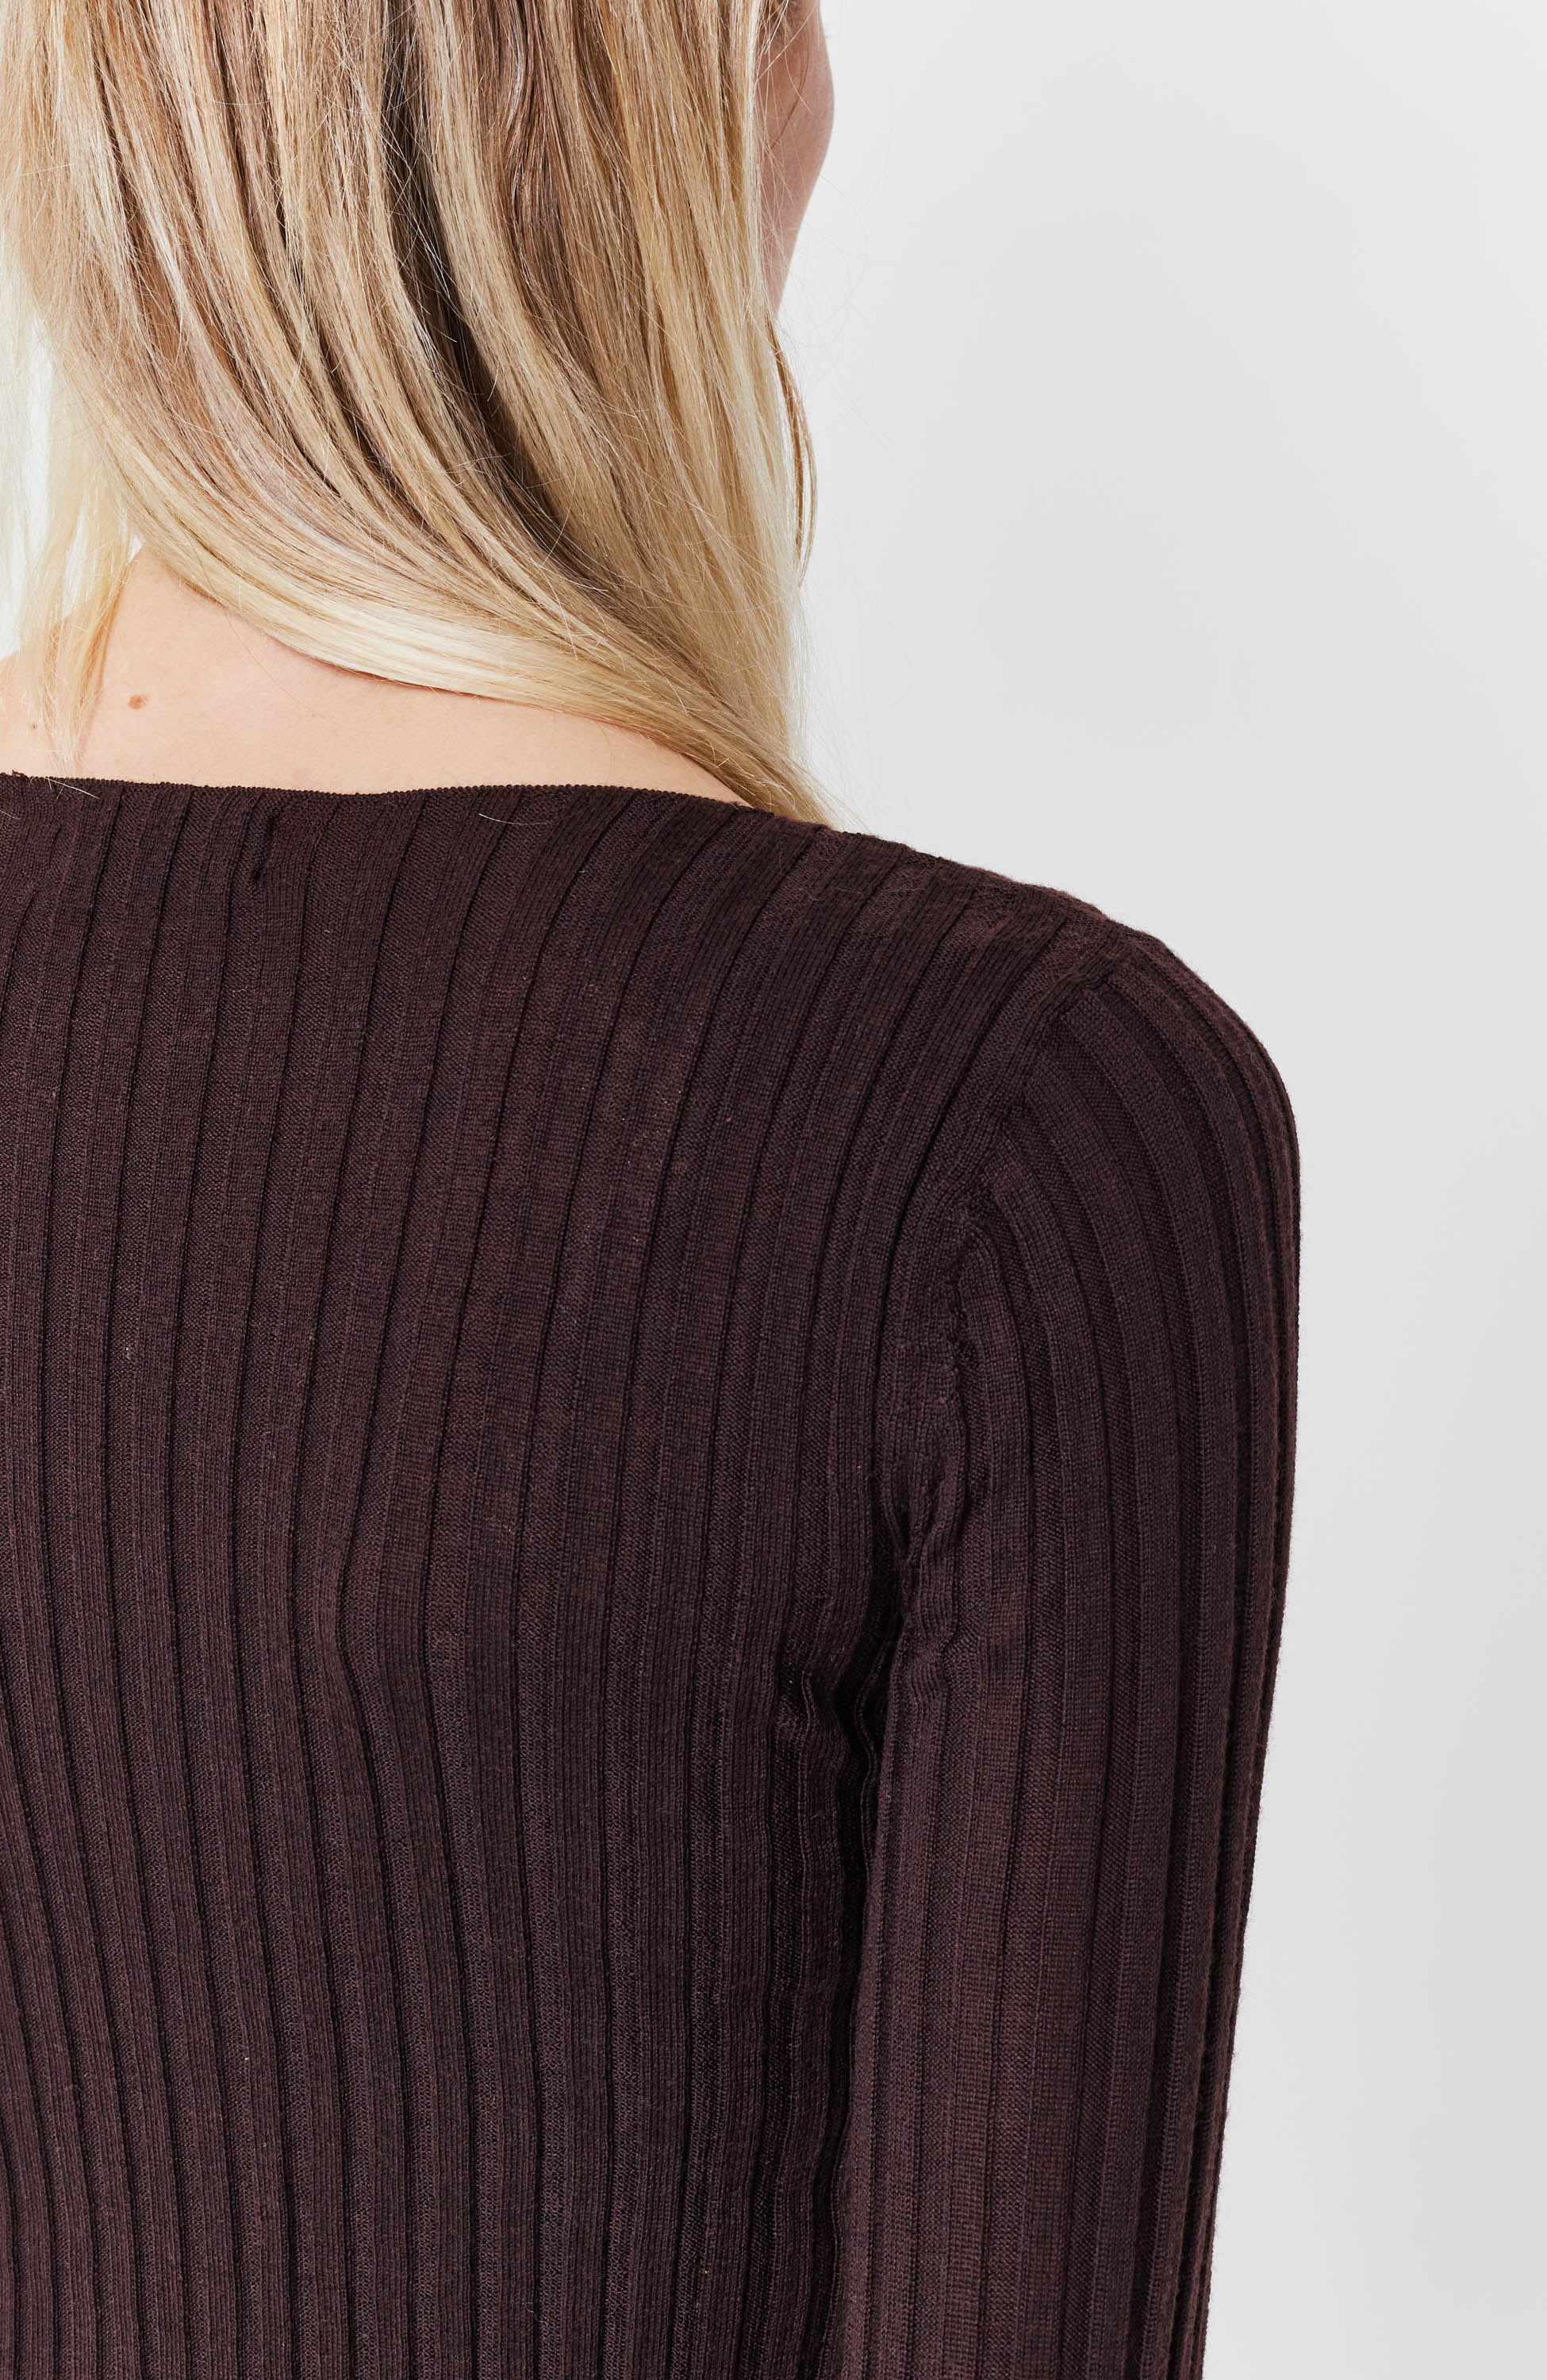 Fine knit ribbed top WINSLET